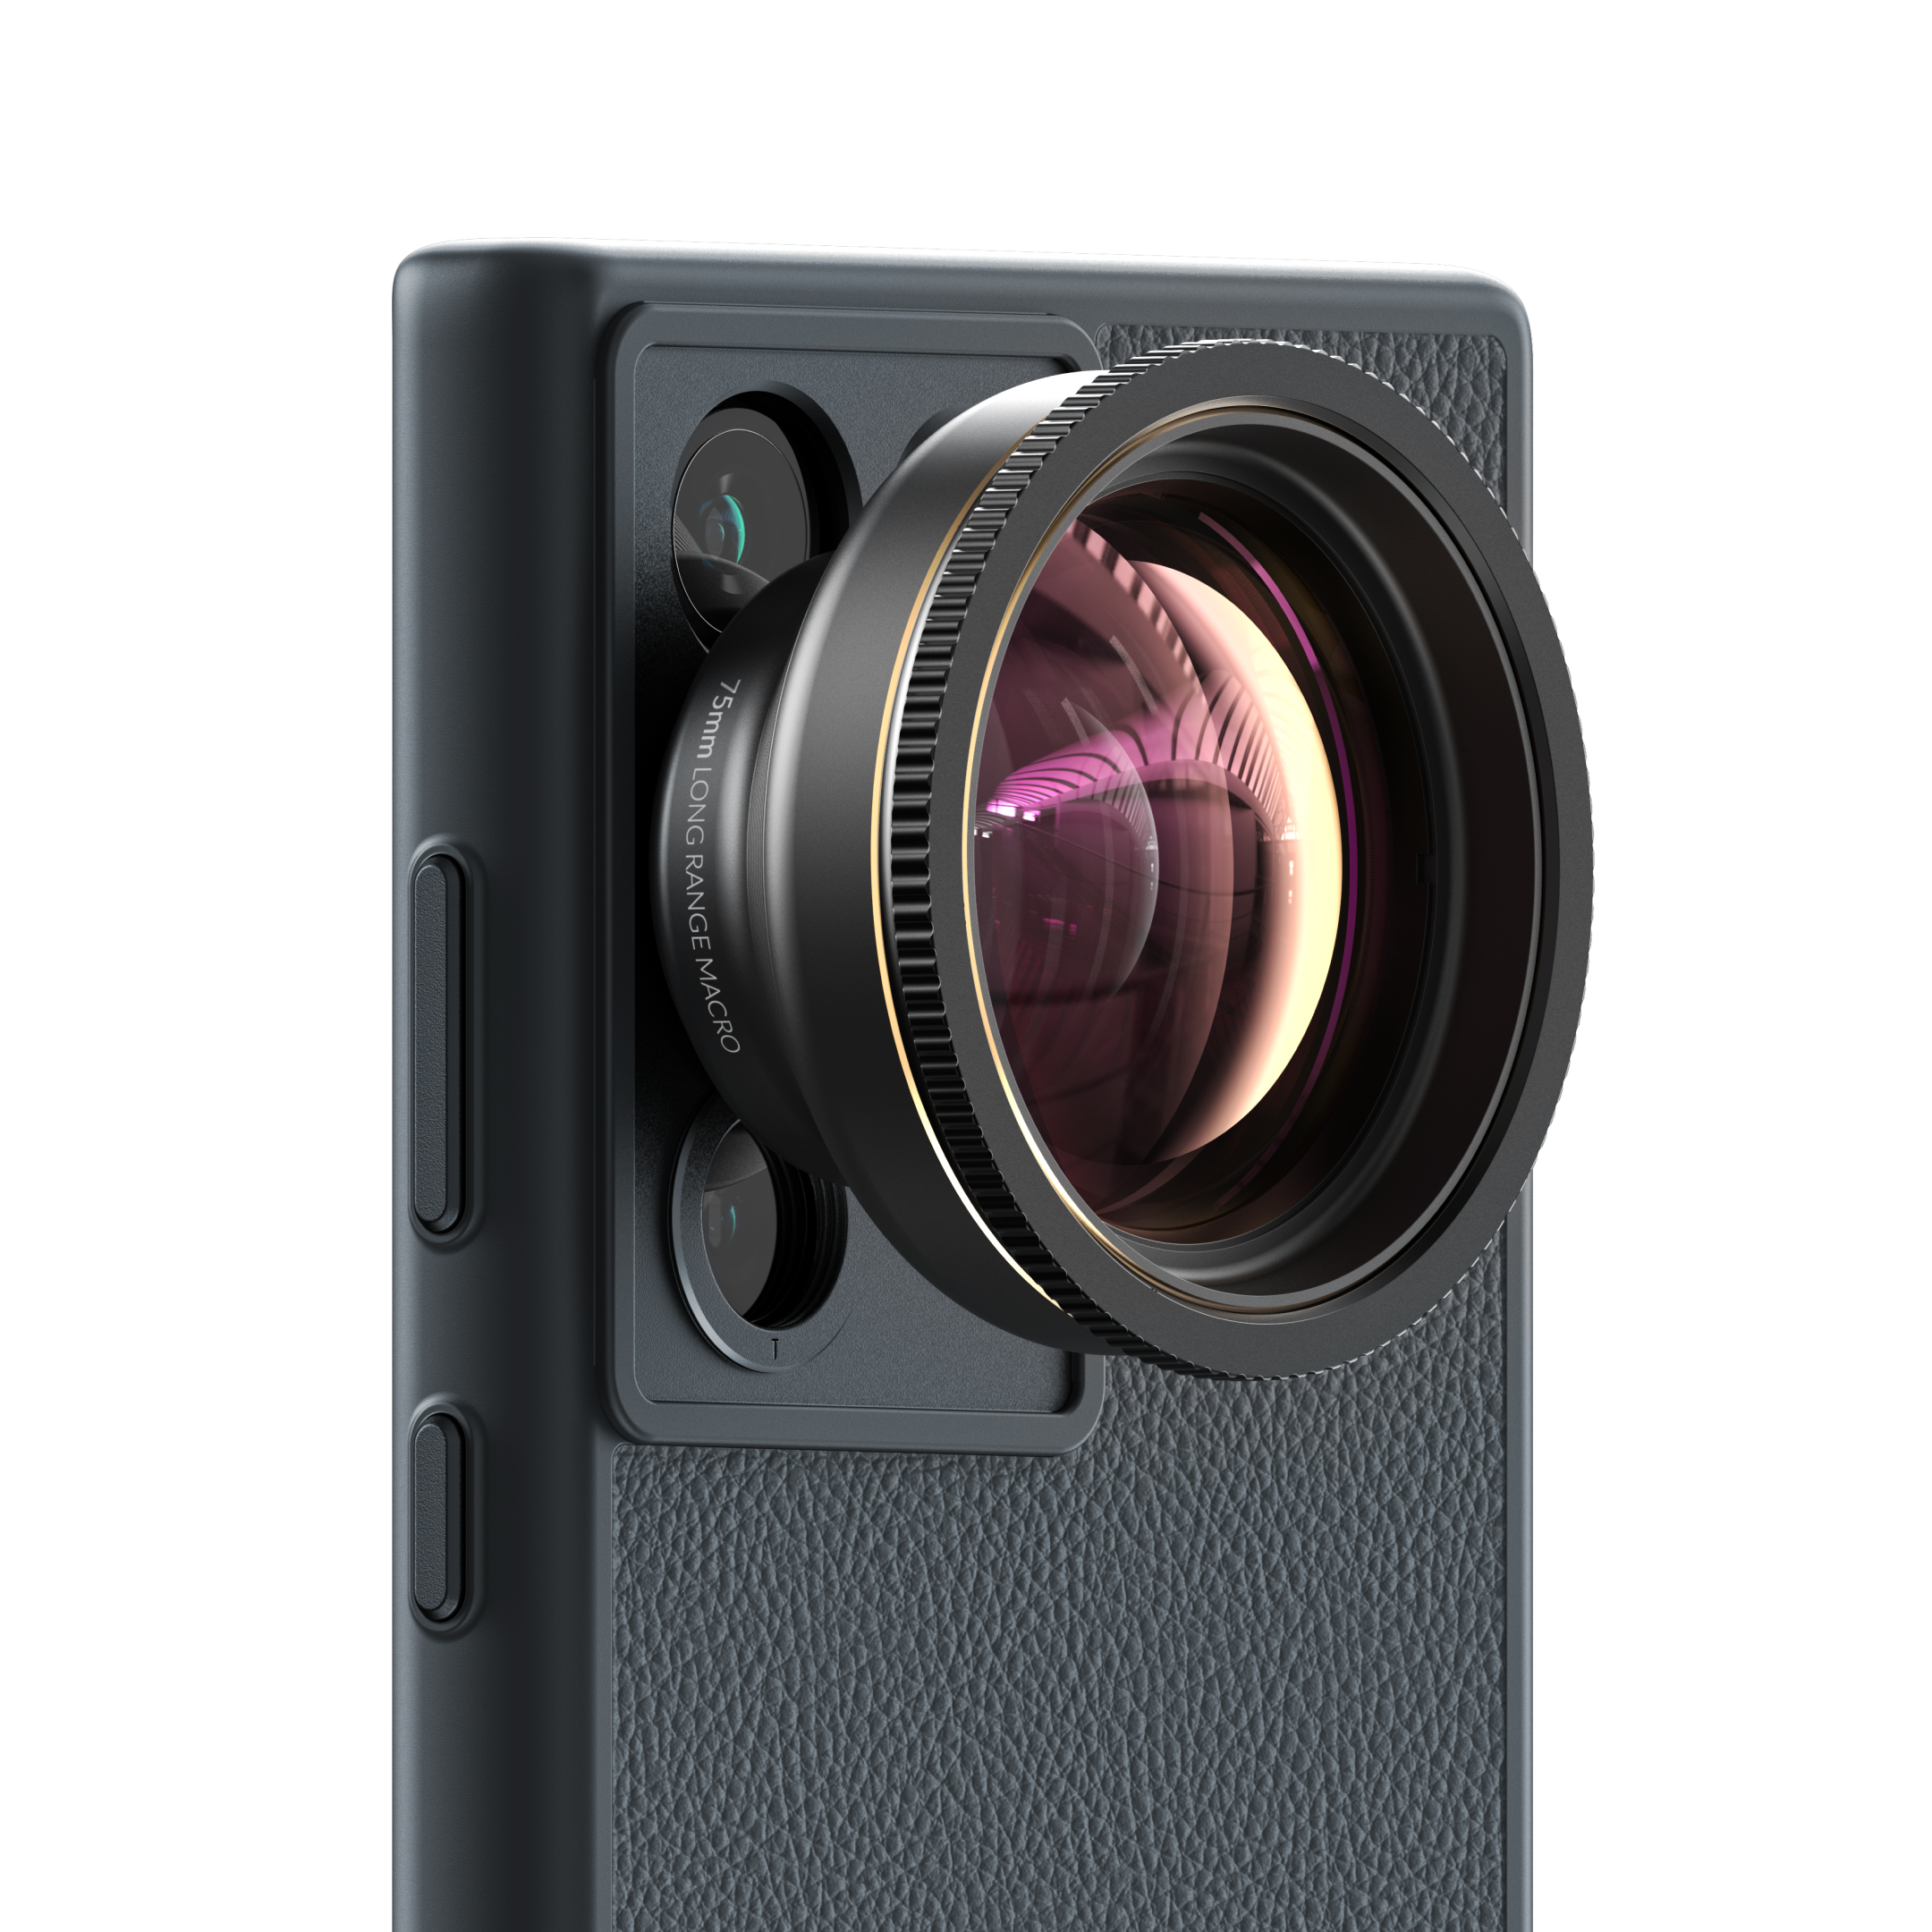 S23 Charcoal Objektivhalterung, SHIFTCAM Samsung, Case Backcover, mit LensUltra Ultra,